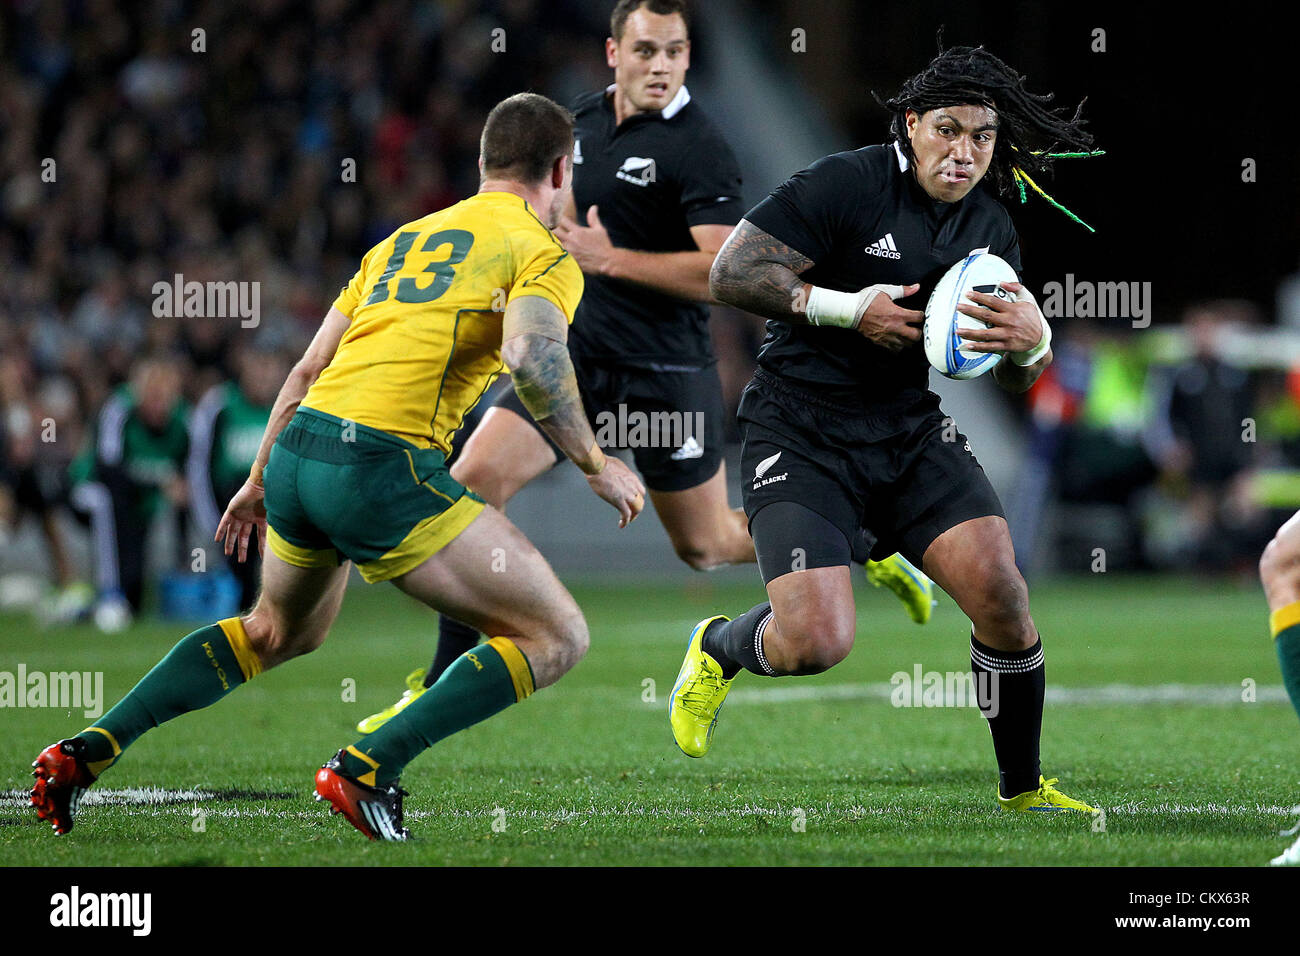 Saturday 25 August 2012. Auckland, New Zealand.  All Blacks' Ma'a Nonu runs at Australia's Rob Horne during the Rugby Championship and Bledisloe Cup Rugby Union test match, New Zealand All Blacks versus Australian Wallabies at Eden Park, Auckland, New Zealand.  Stock Photo